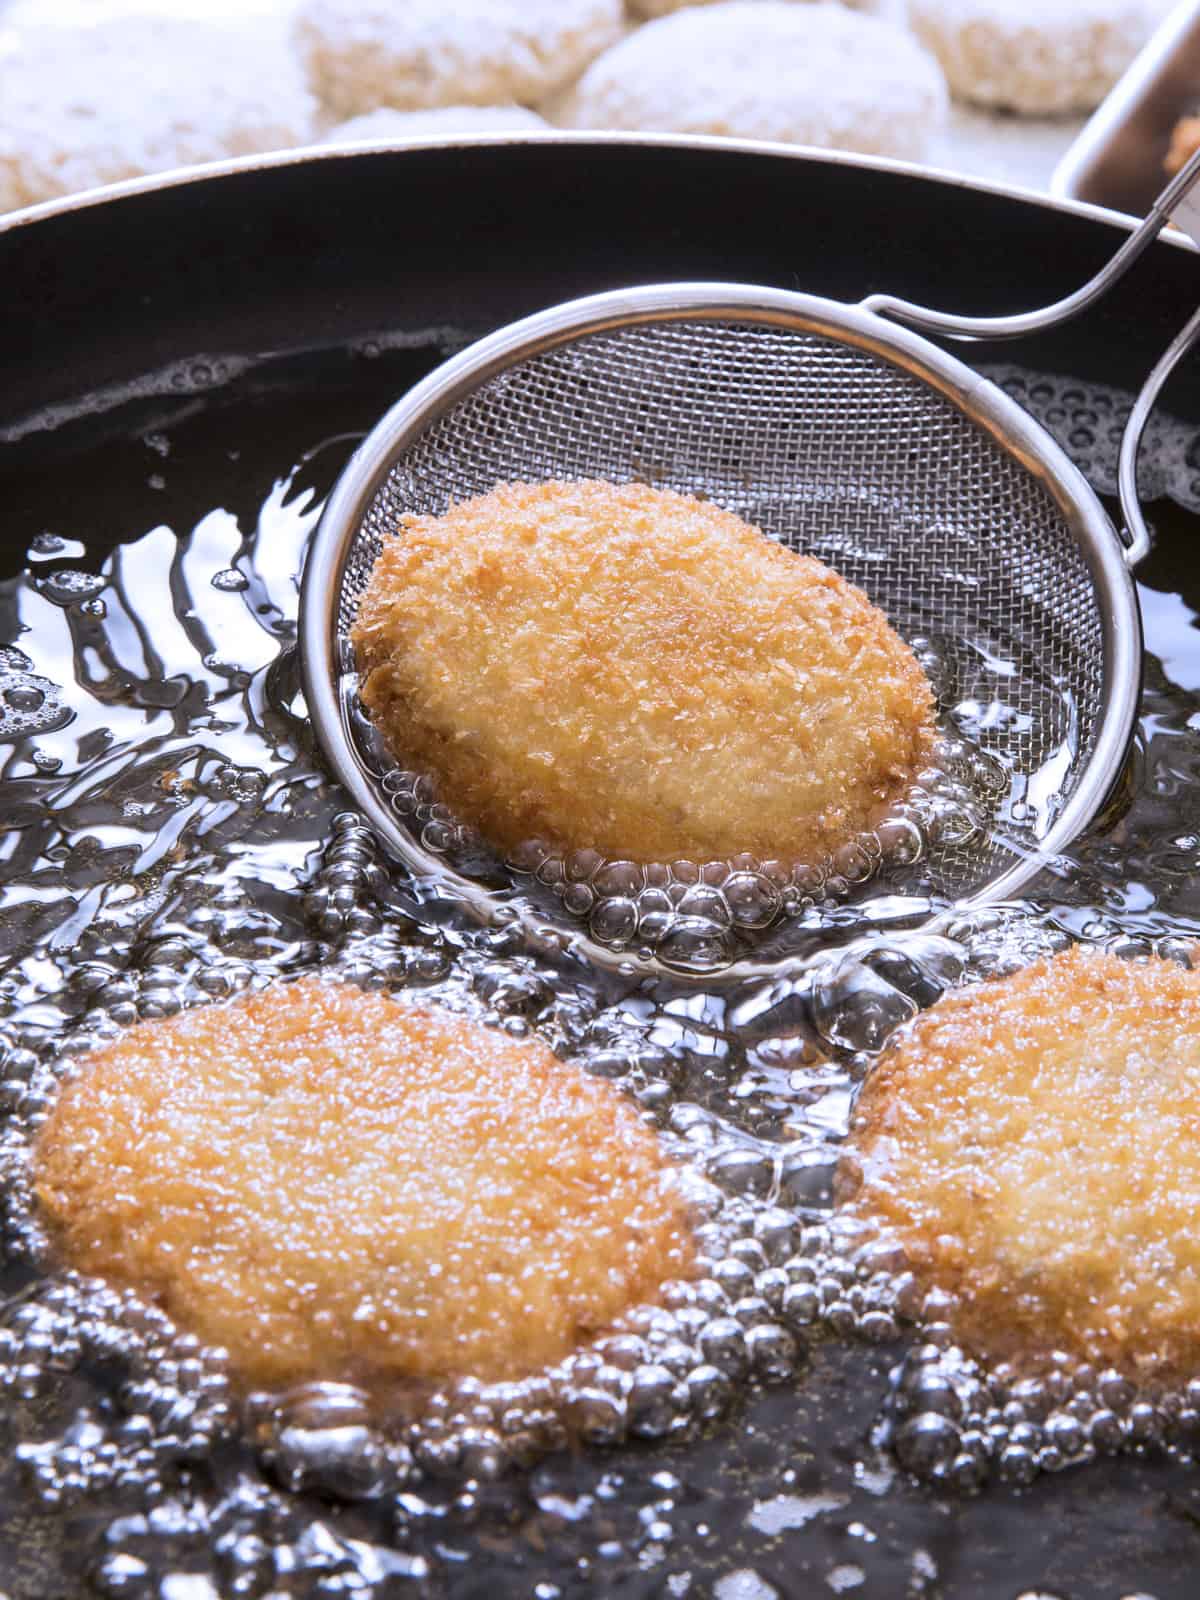 Three fish cakes frying and a spatula.